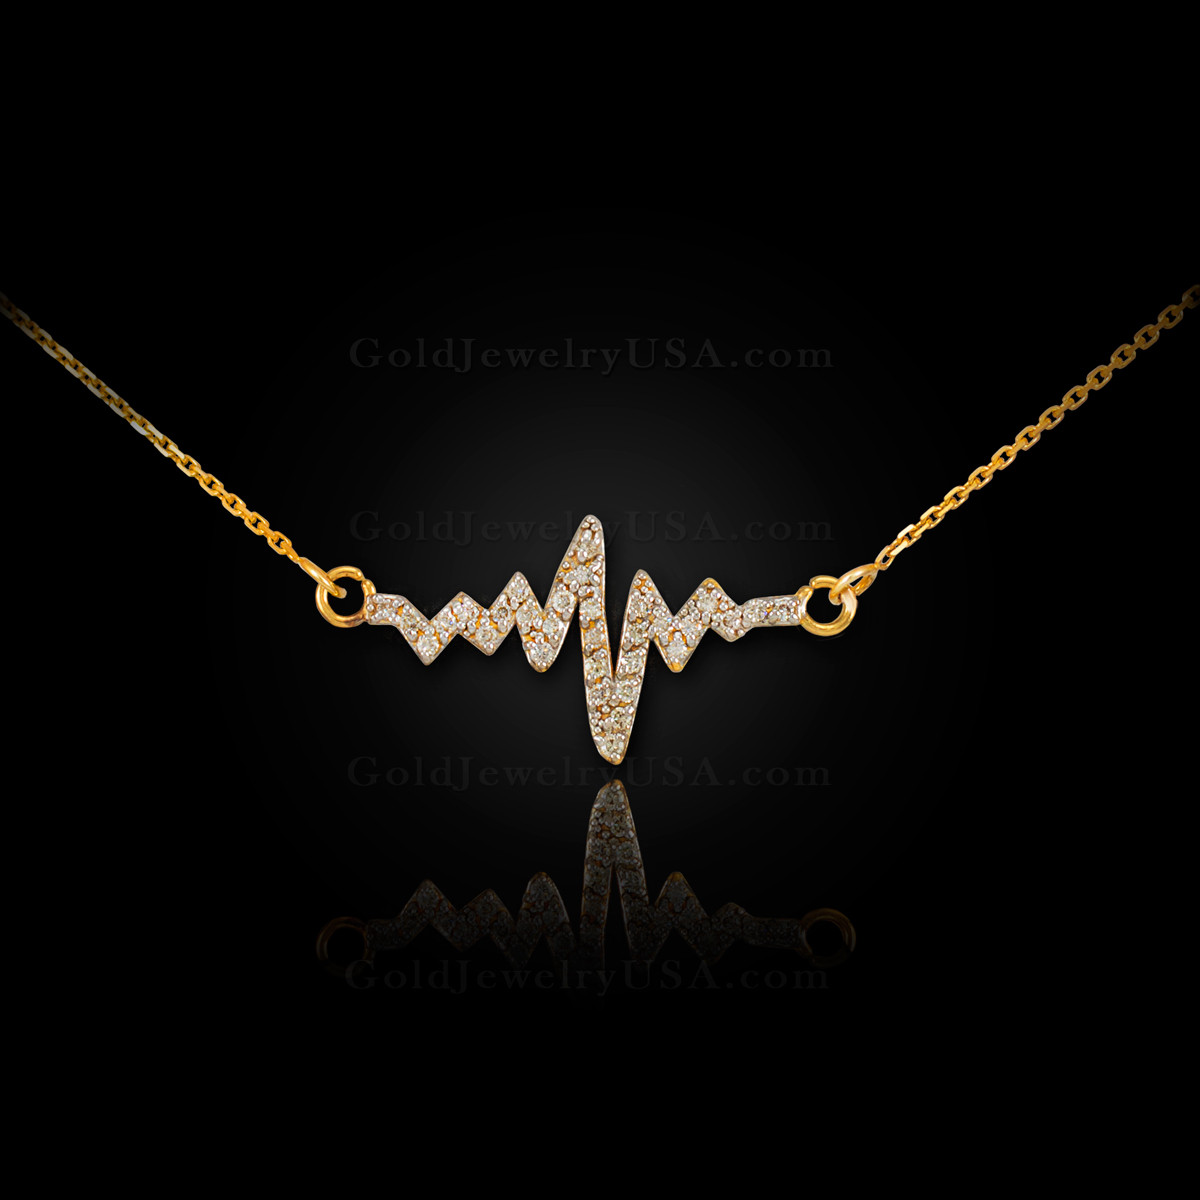 gold studded heartbeat necklace